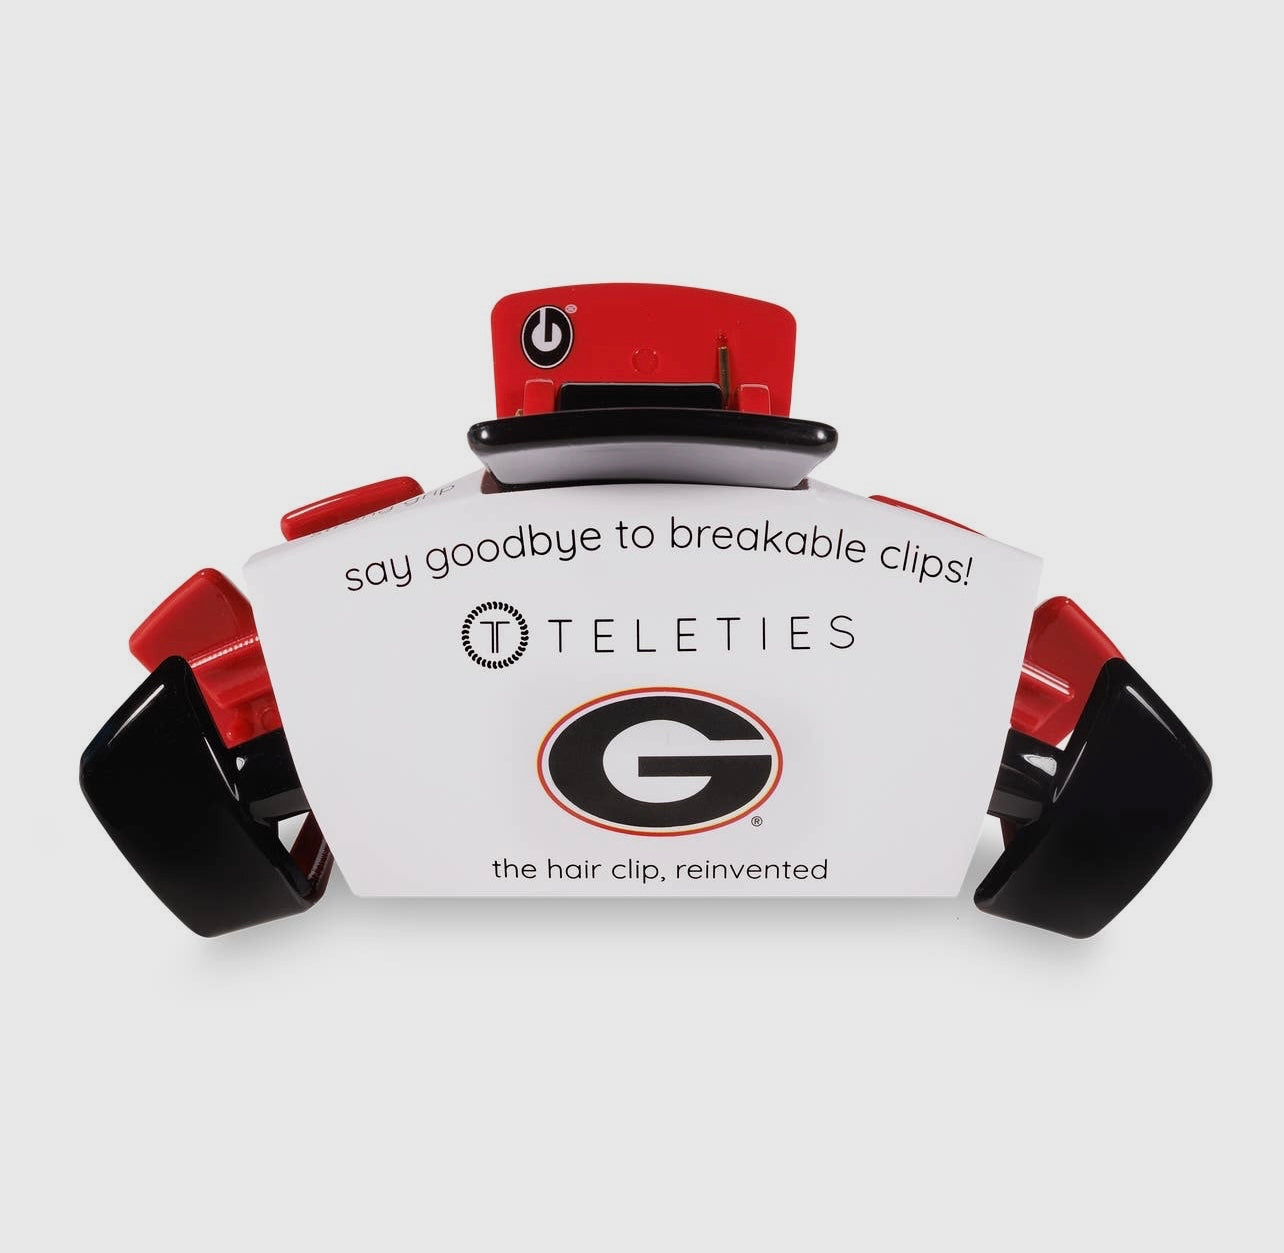 University of Georgia Collegiate Teletie Claw Clip in red and black. Side view with packaging.